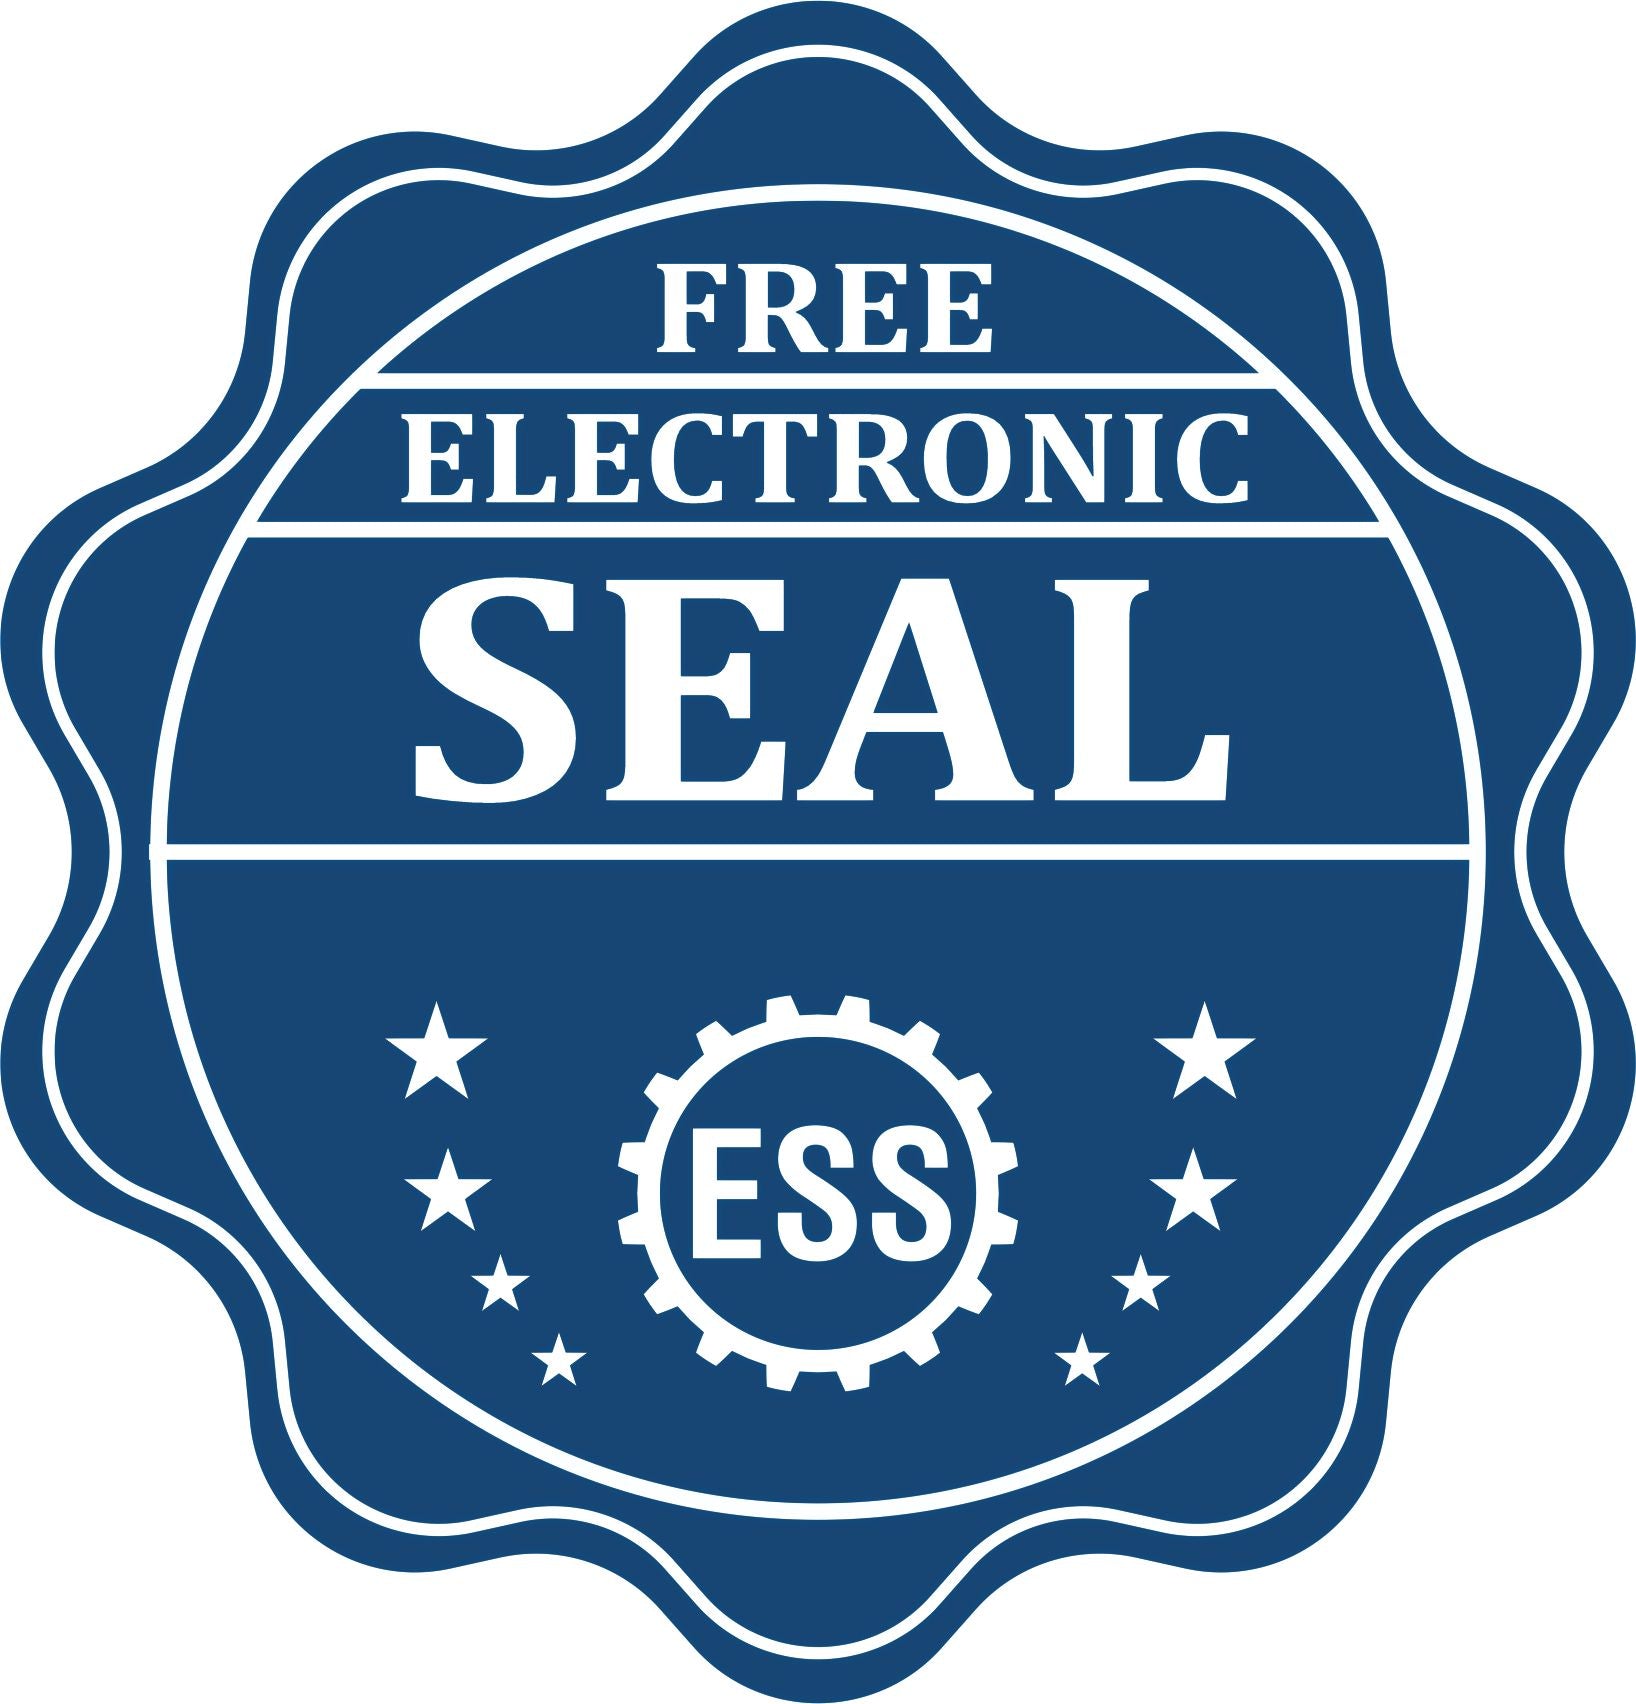 A badge showing a free electronic seal for the State of Texas Long Reach Architectural Embossing Seal with stars and the ESS gear on the emblem.